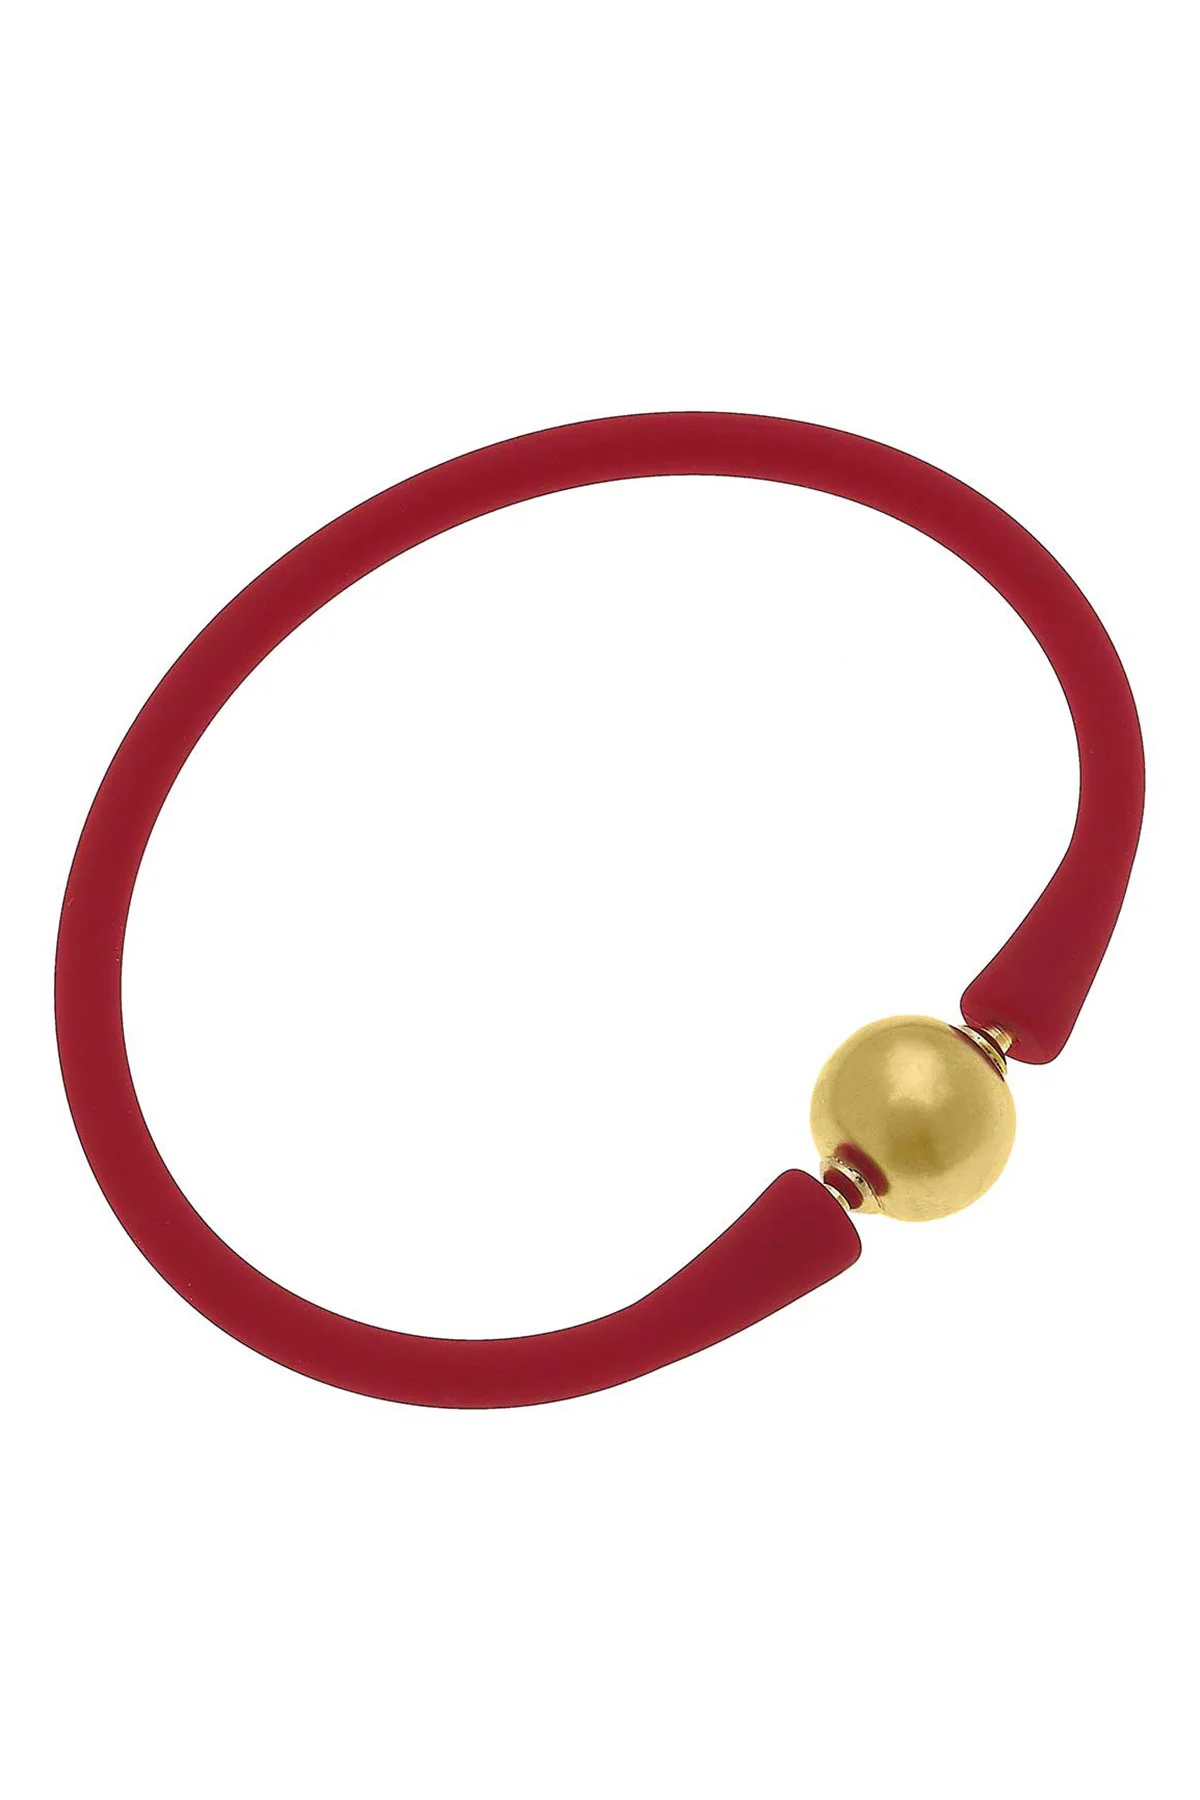 Bali 24K Plated Ball Bead Silicone Bracelet-Red